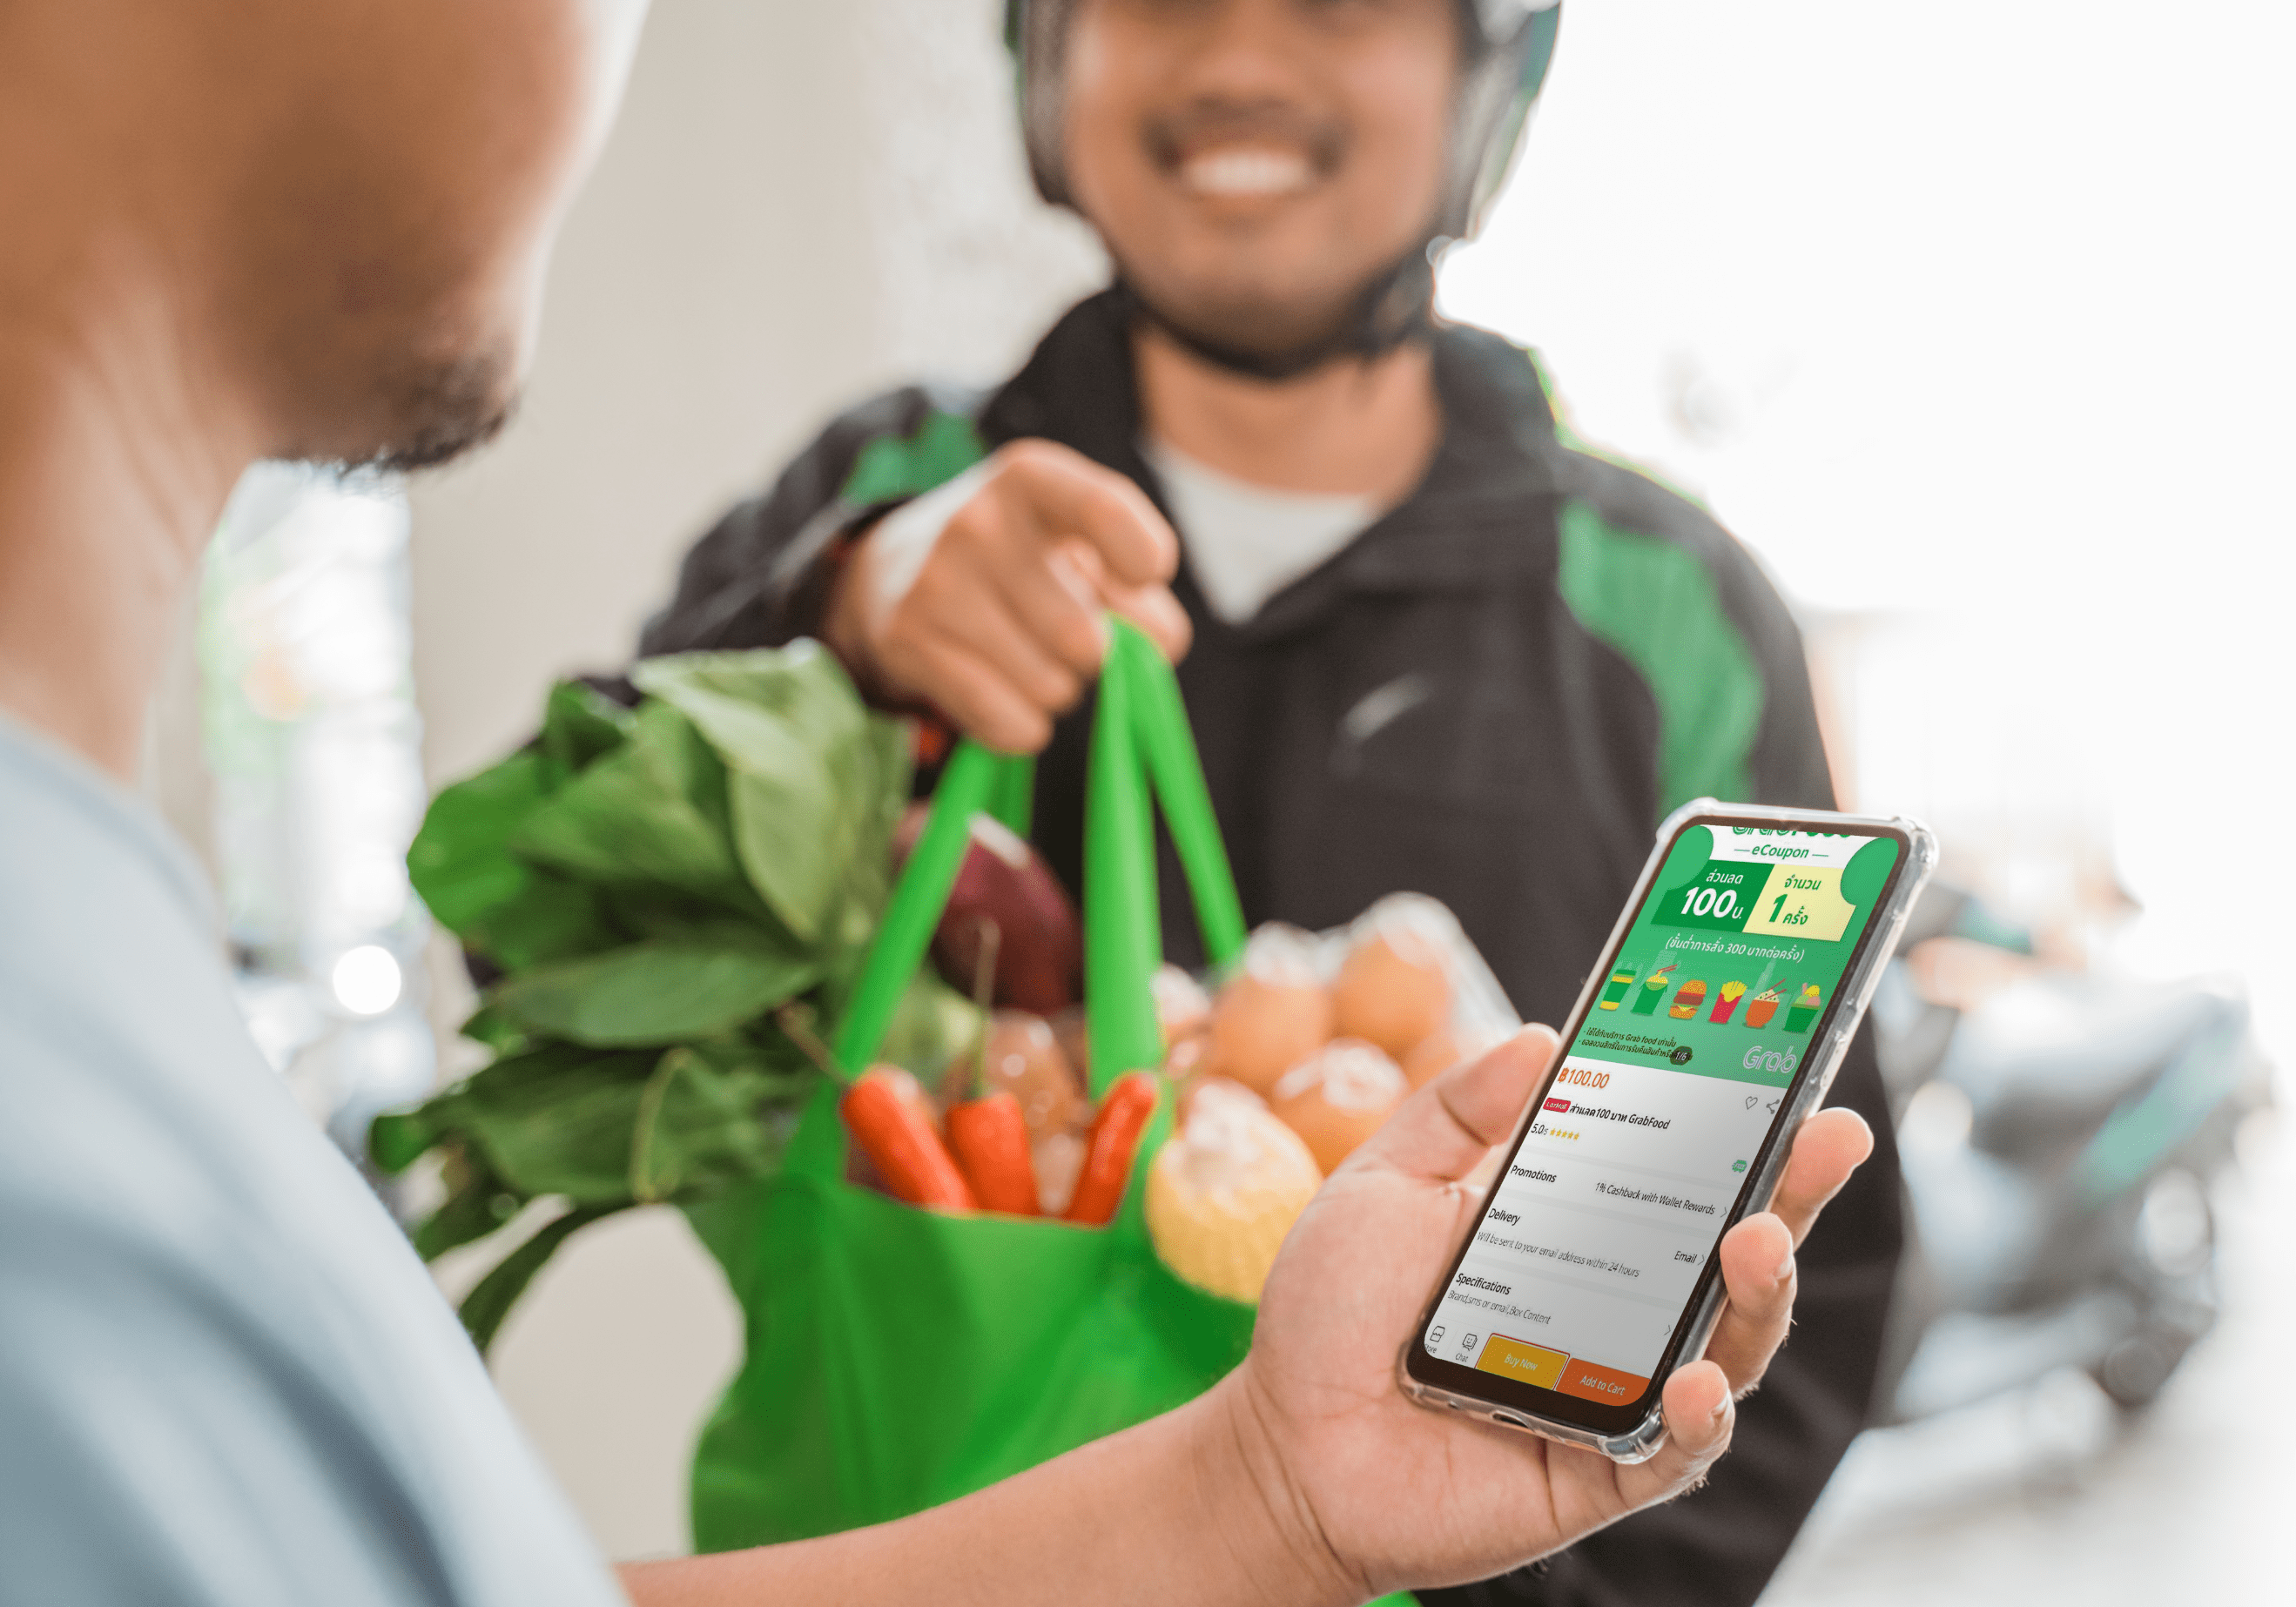 Grab completes acquisition of Malaysian supermarket chain Jaya Grocer